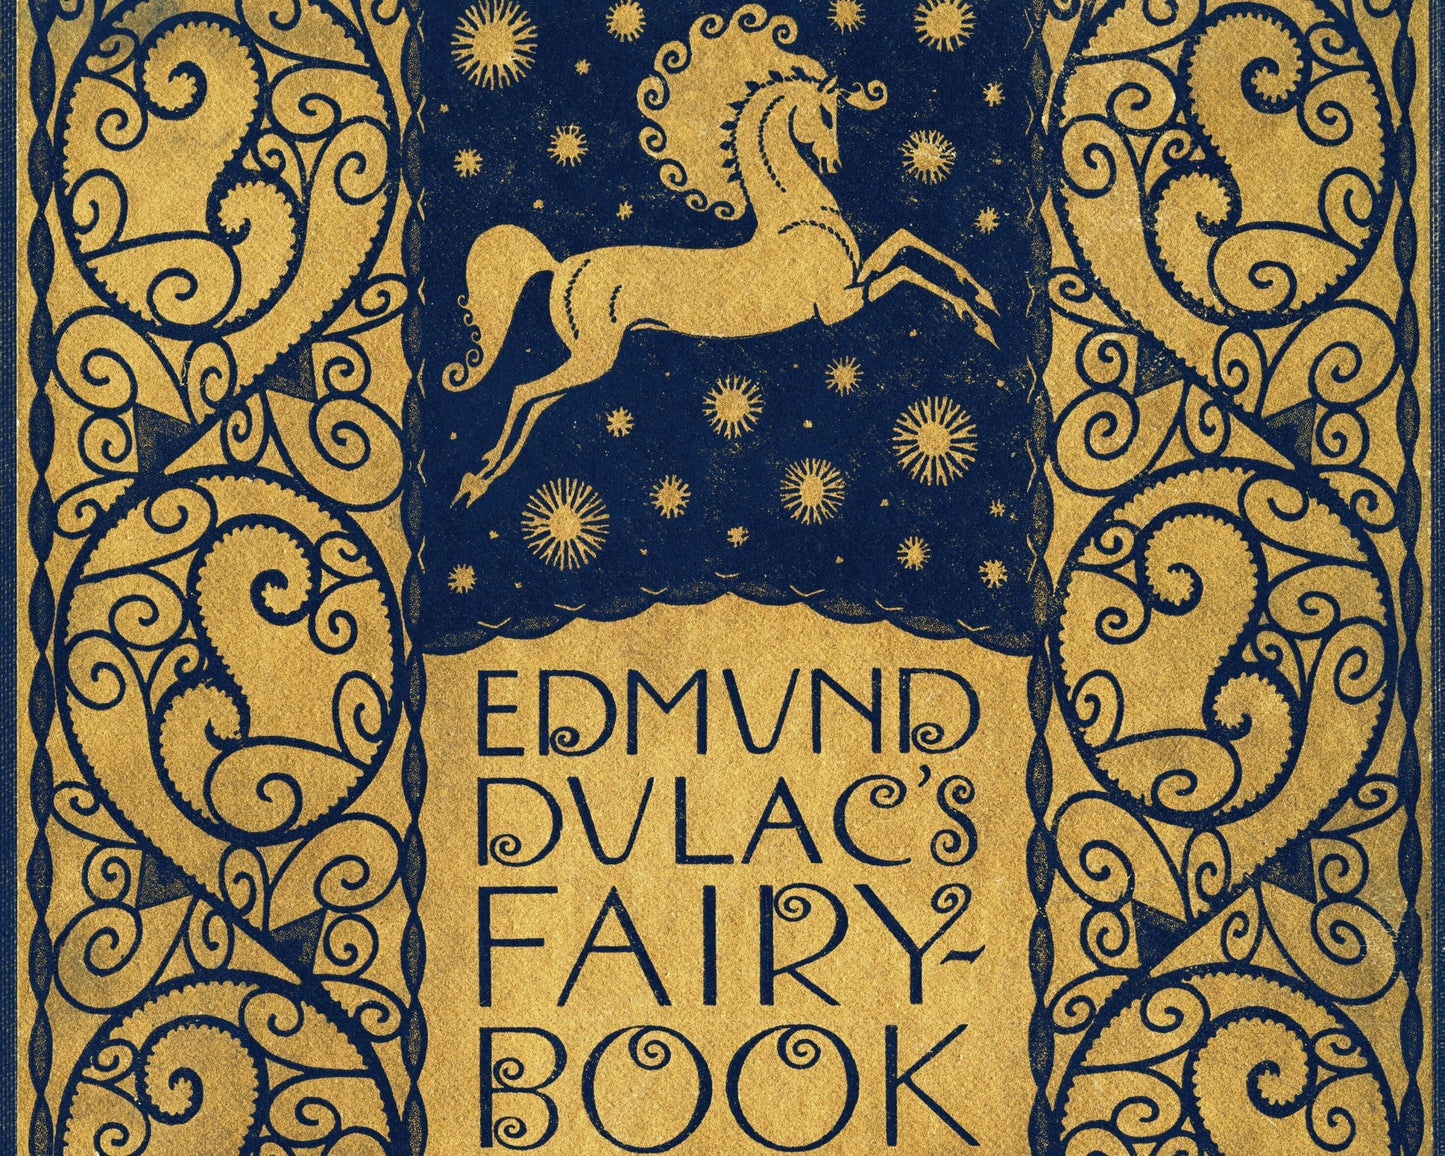 Vintage Book Cover Illustration "Edmund Dulac's Fairy Book" (c.1916) - Mabon Gallery